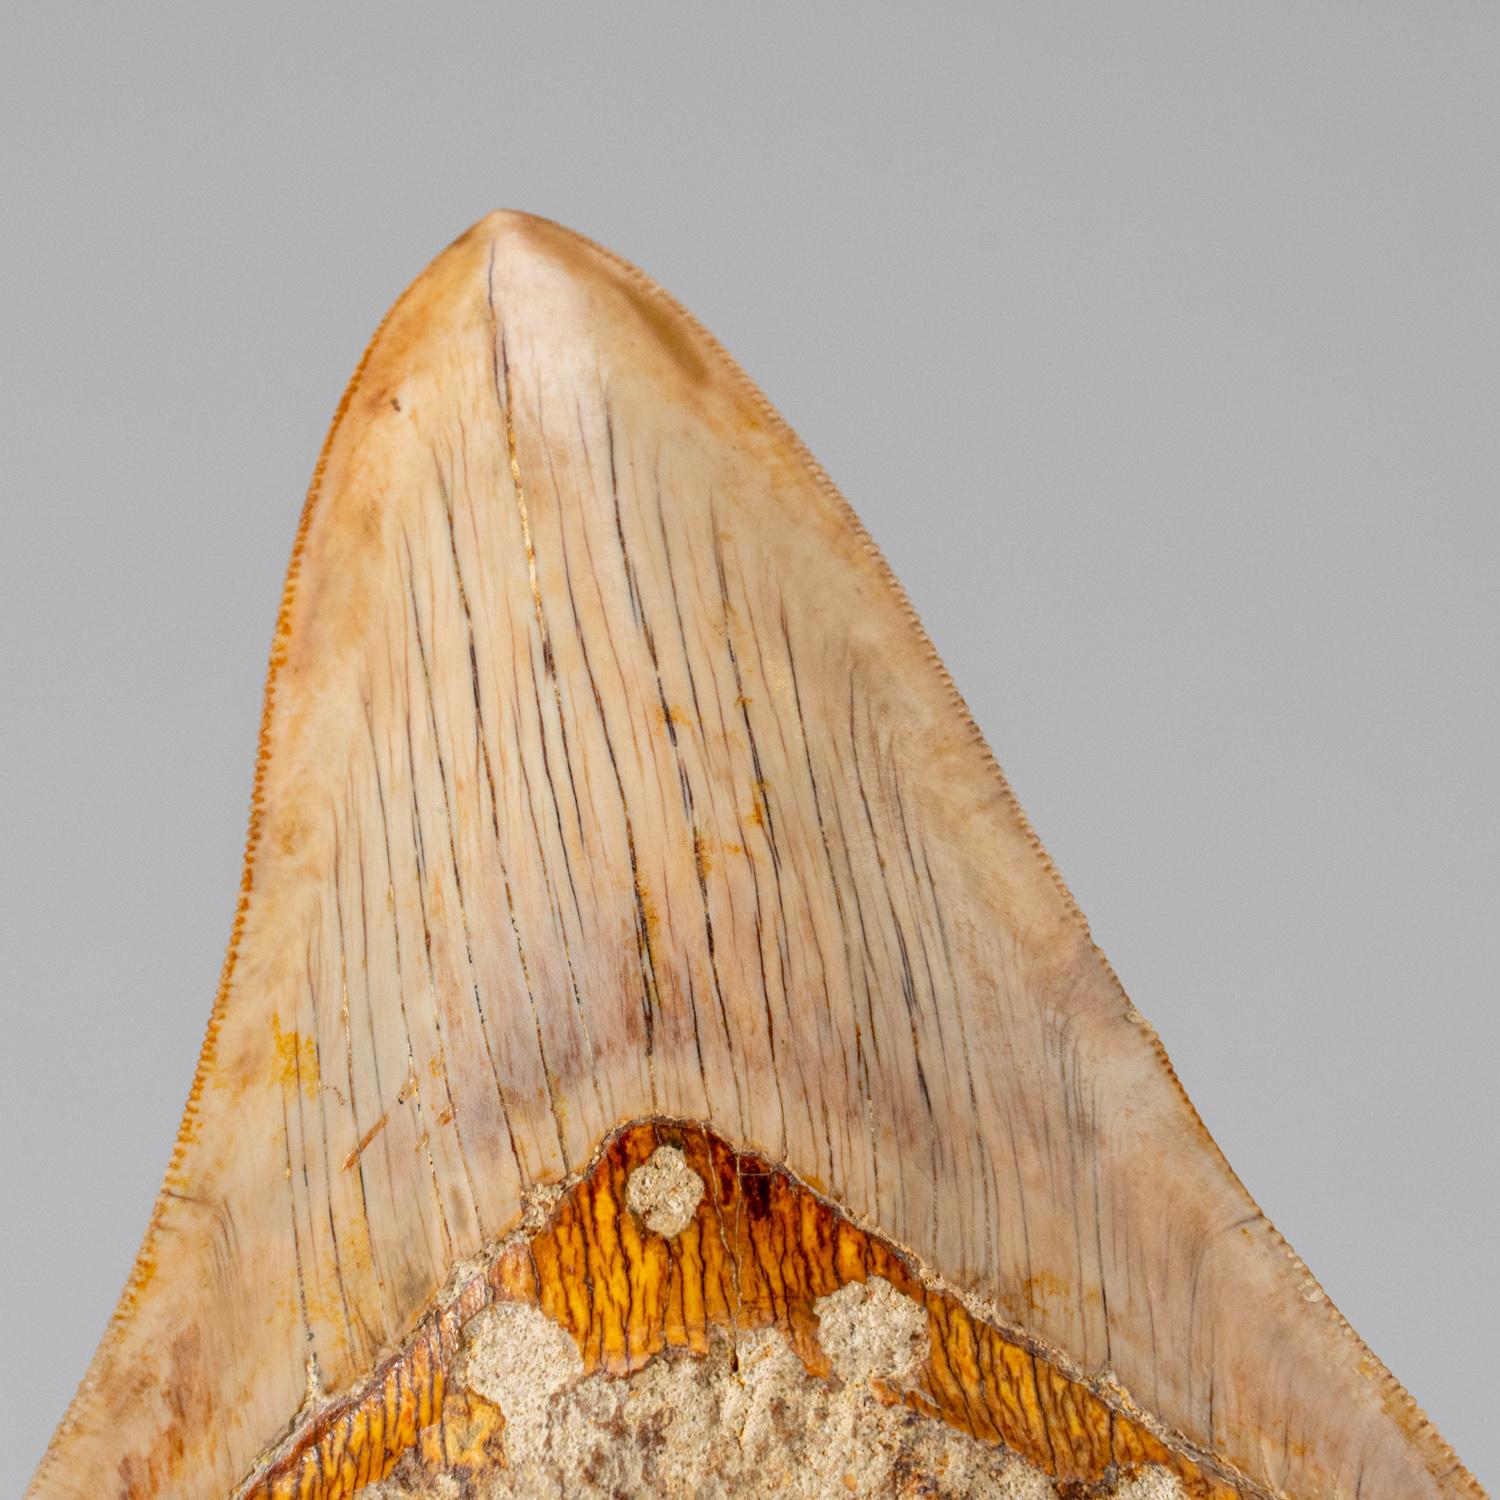 This genuine Megalodon Shark Tooth, sourced by divers in waters off the coast of Indonesia, is 100% genuine and measures approximately 5